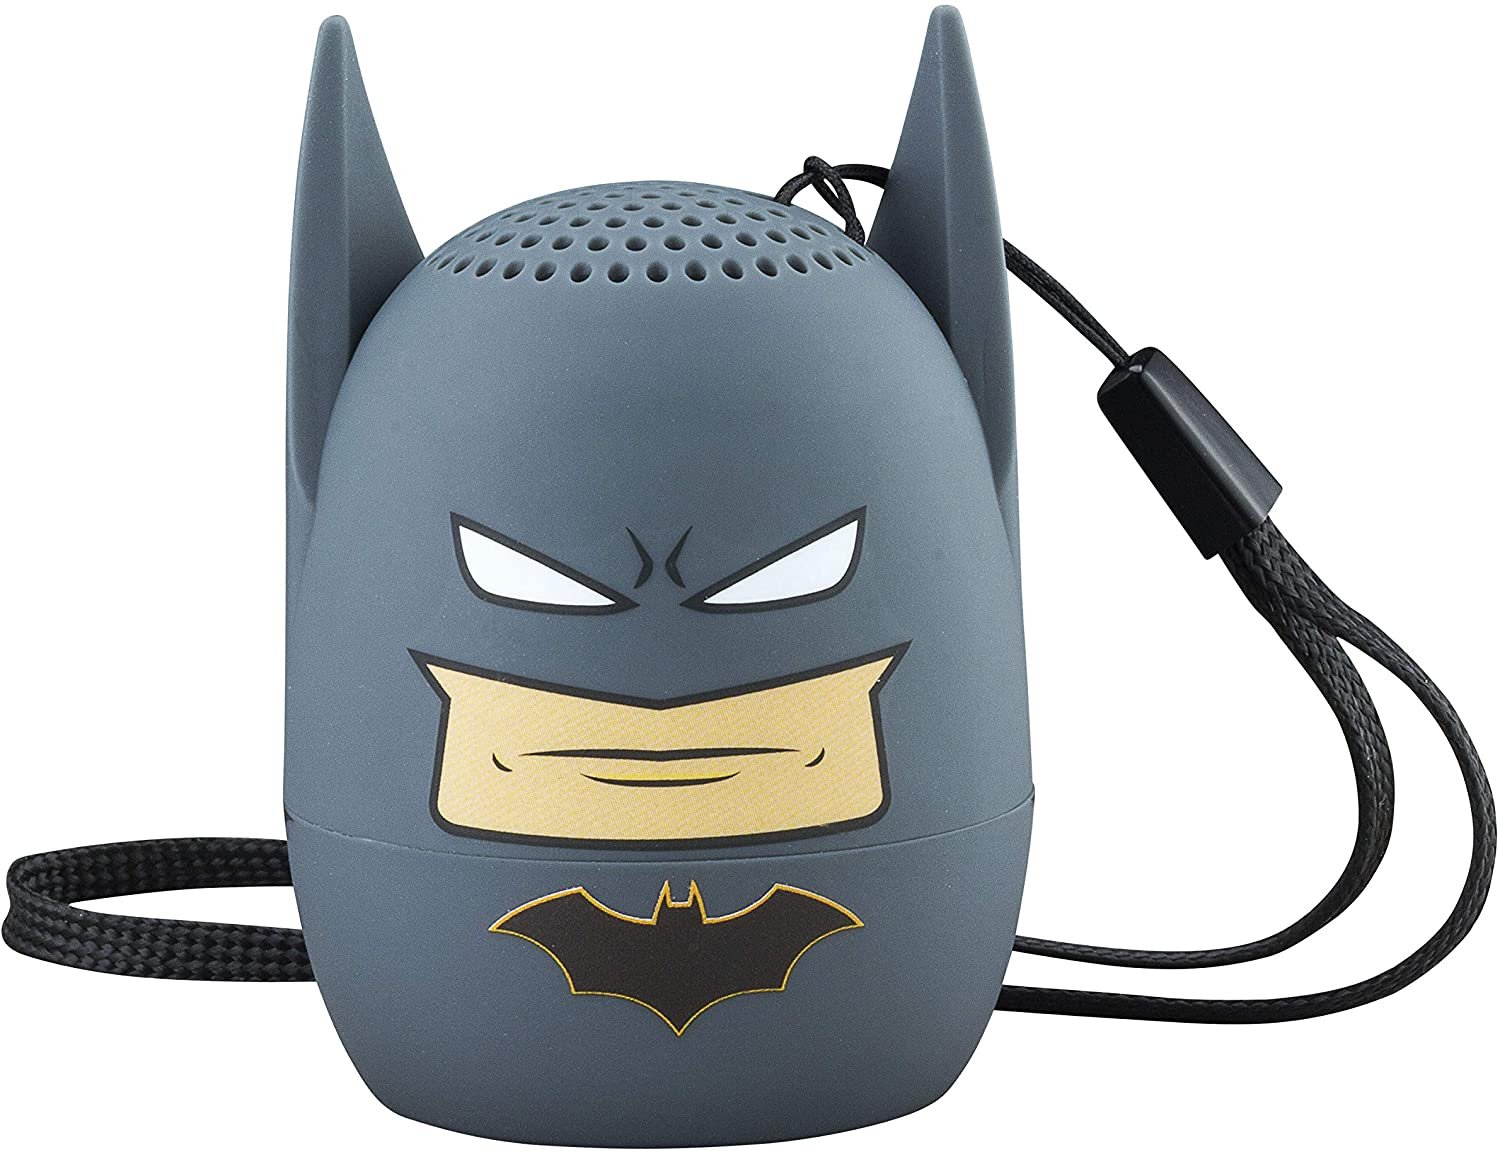 Batman Bluetooth Speaker Portable Wireless Small But Loud N Crystal Clear Mini Bluetooth Speakers for Home, Travel, Outdoor, Beach, Shower, Rechargeable, Compatible with iPhone Samsung - image 1 of 4